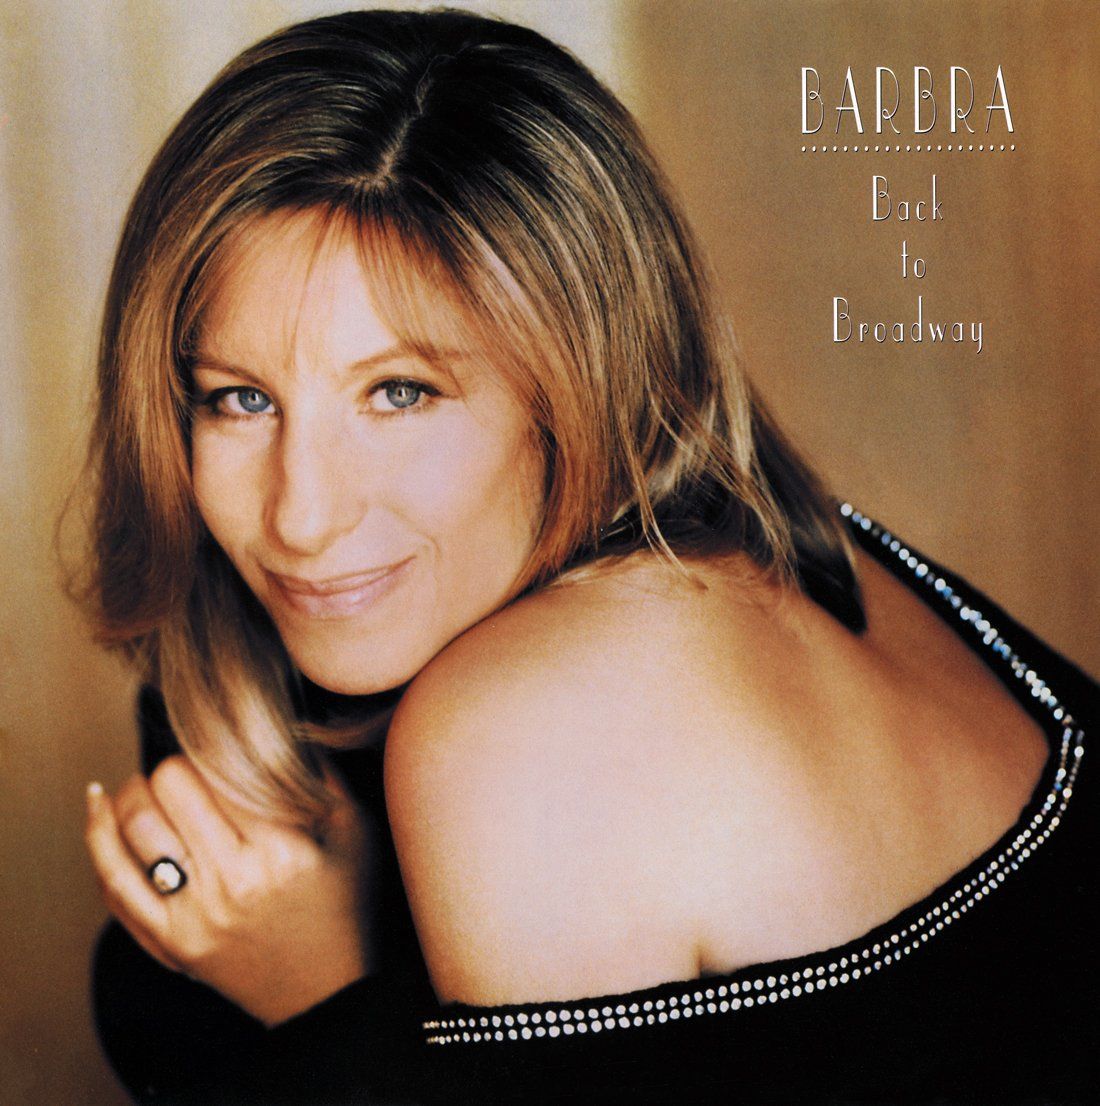 Cover of Barbra: Back to Broadway CD